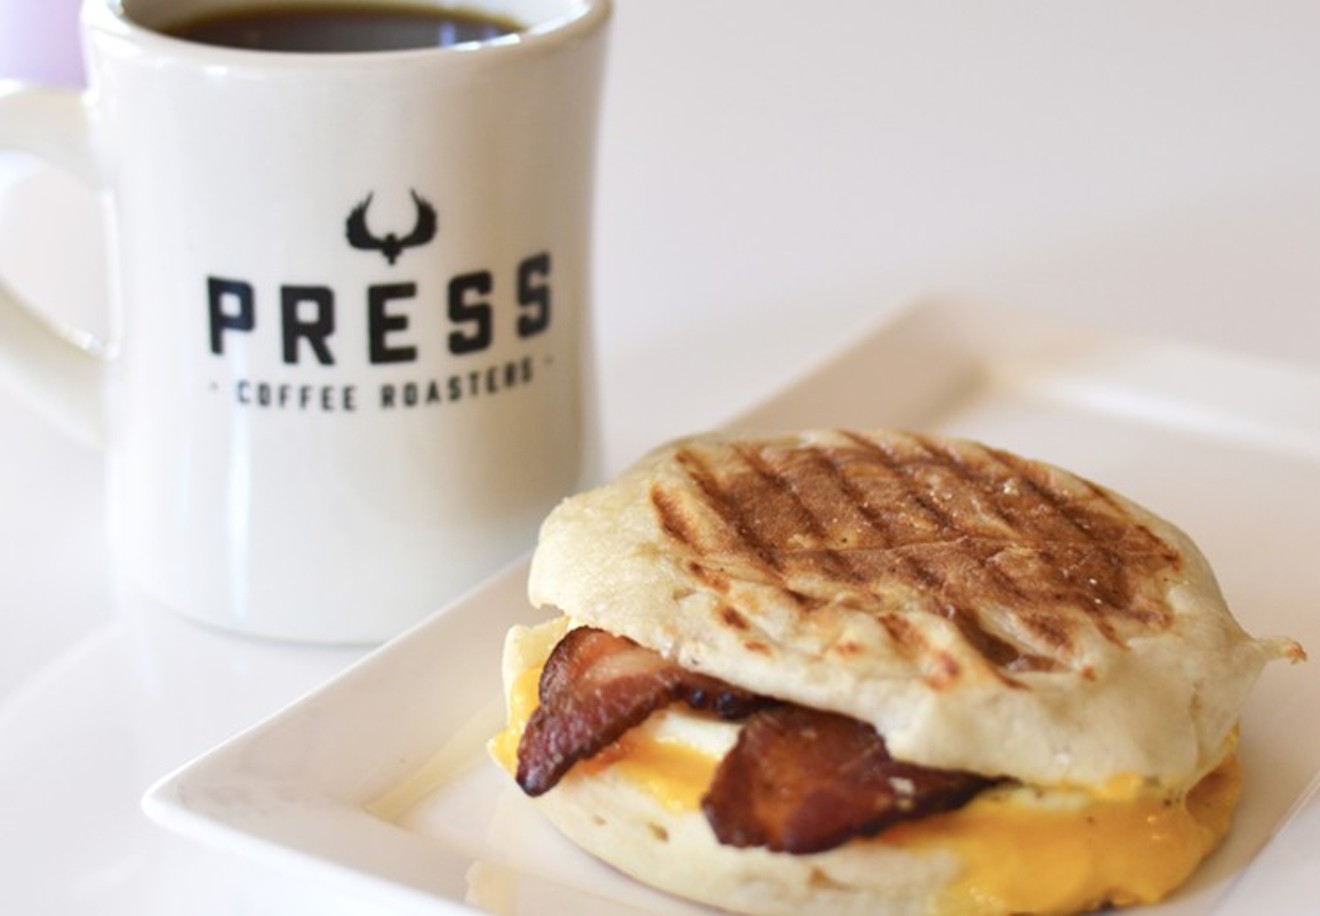 Come spring 2019, Press Coffee Roasters will add onto its eight locations with another one in Phoenix.